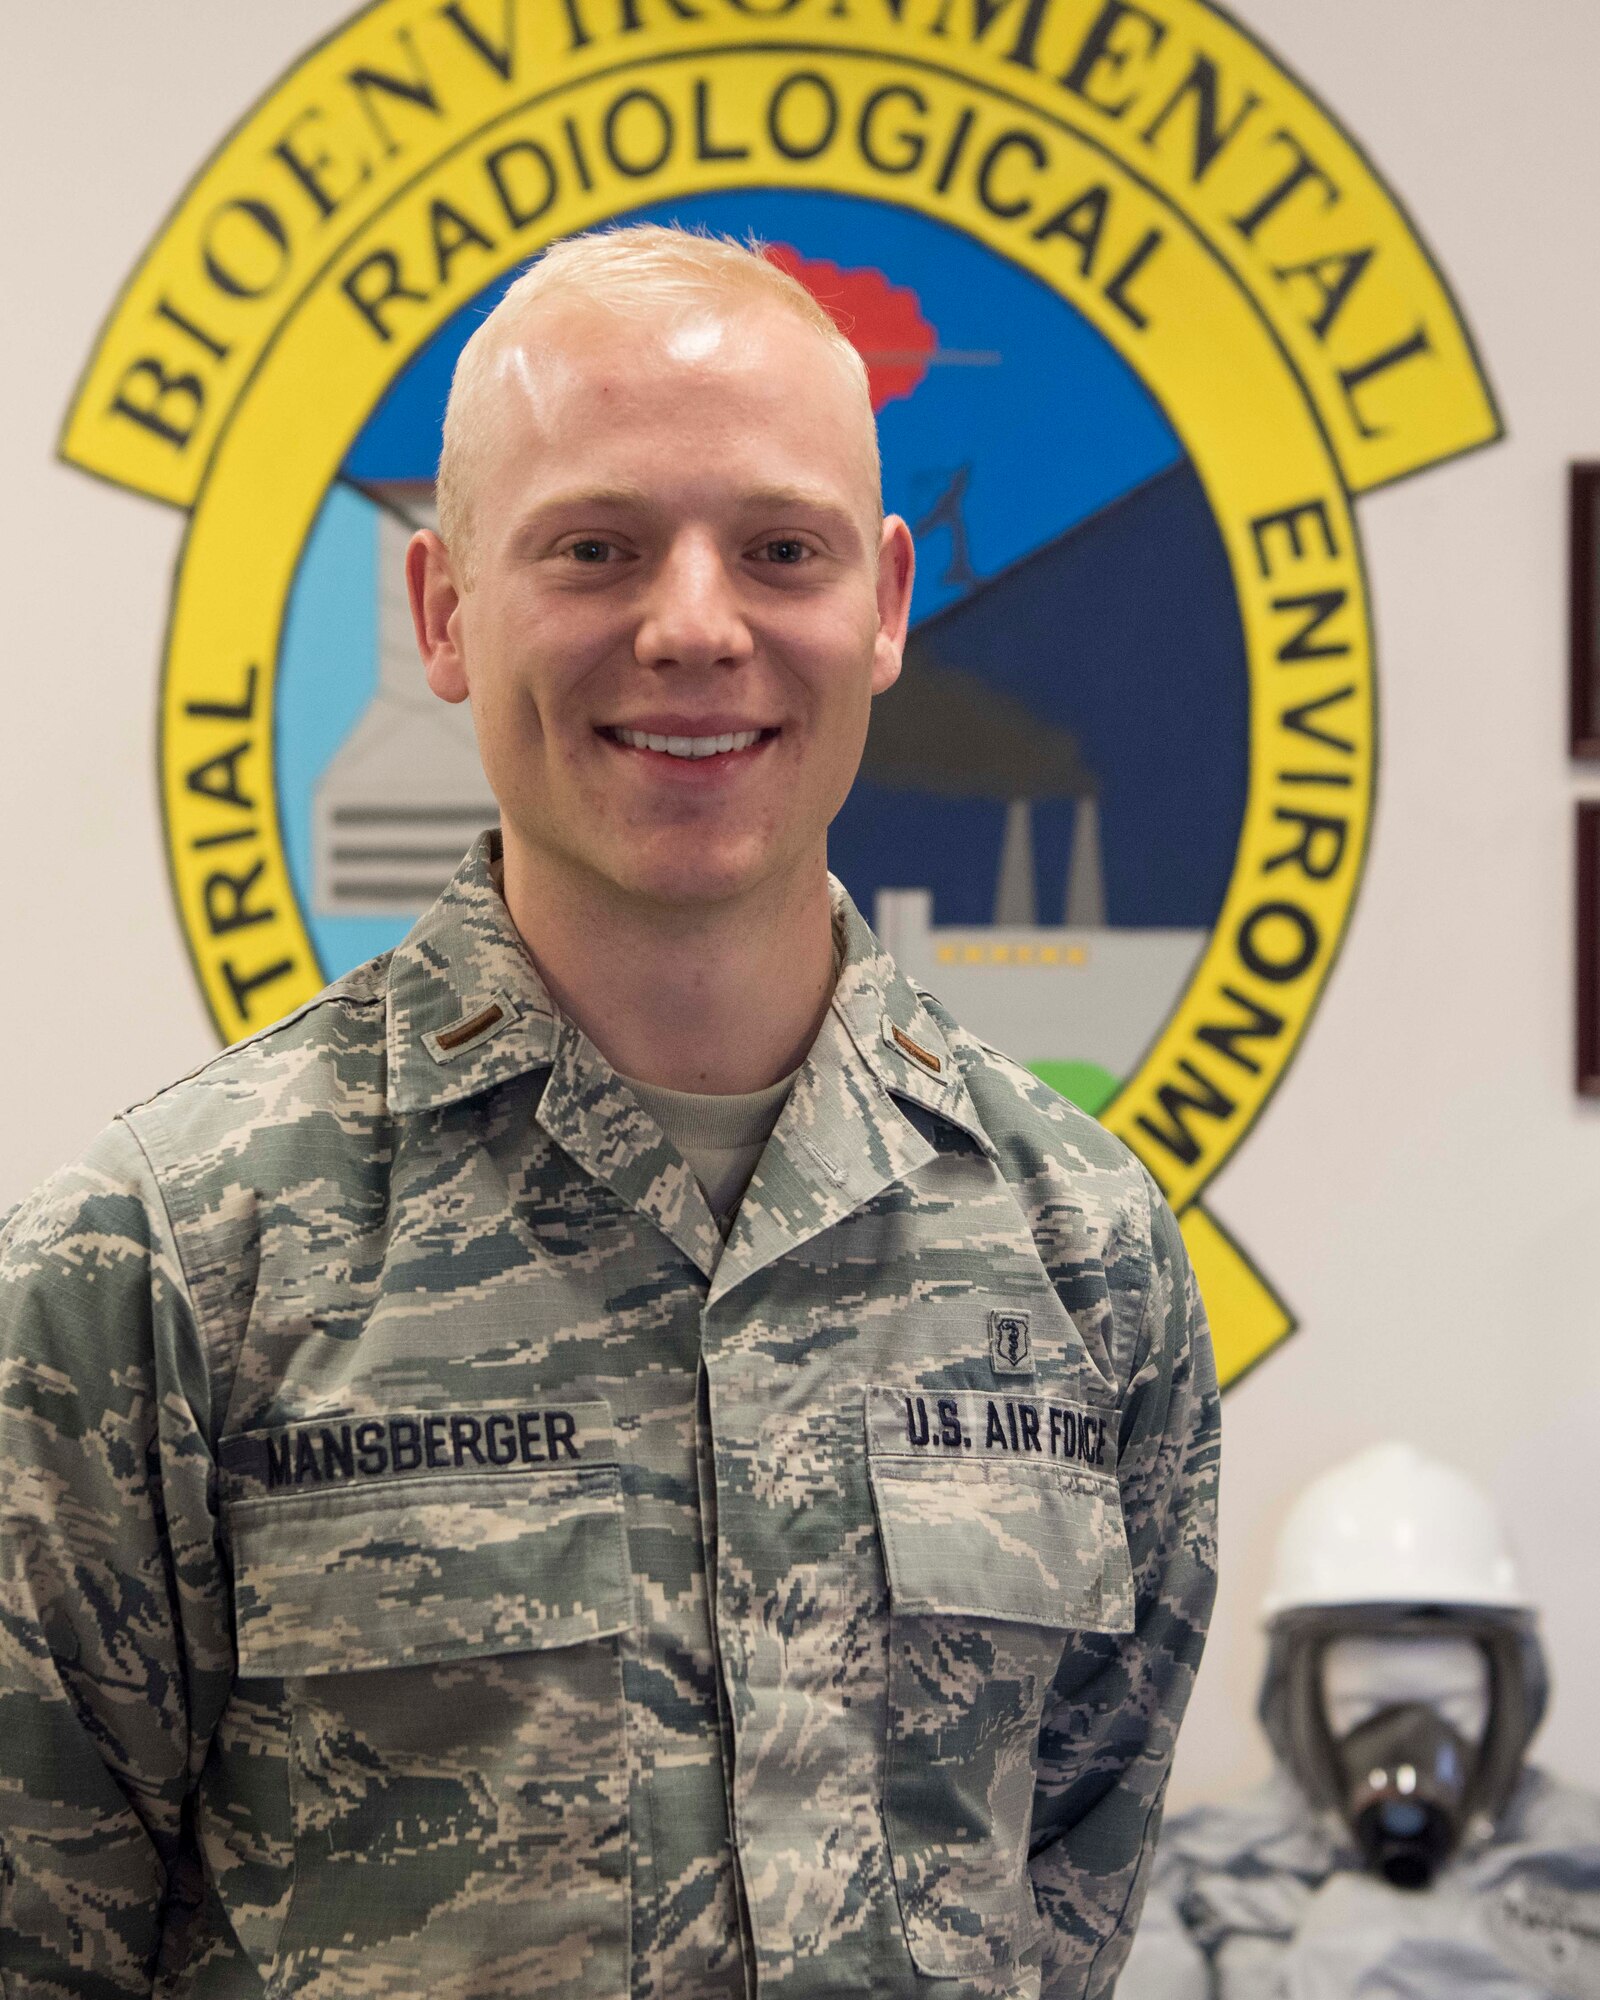 2nd Lt. Connor Mansberger, 49th Medical Group Bioenvironmental Engineering chief of operations, poses in the bioenvironmental engineering building, Jan. 11, 2019, on Holloman Air Force Base, N.M. Holloman’s bioenvironmental engineers advise commanders on heath assessment operations regarding their work centers, monitor the use of hazardous materials as well as the presence of chemical, biological, radiological or nuclear materials. (U.S. Air Force photo by Staff Sgt. BreeAnn Sachs)